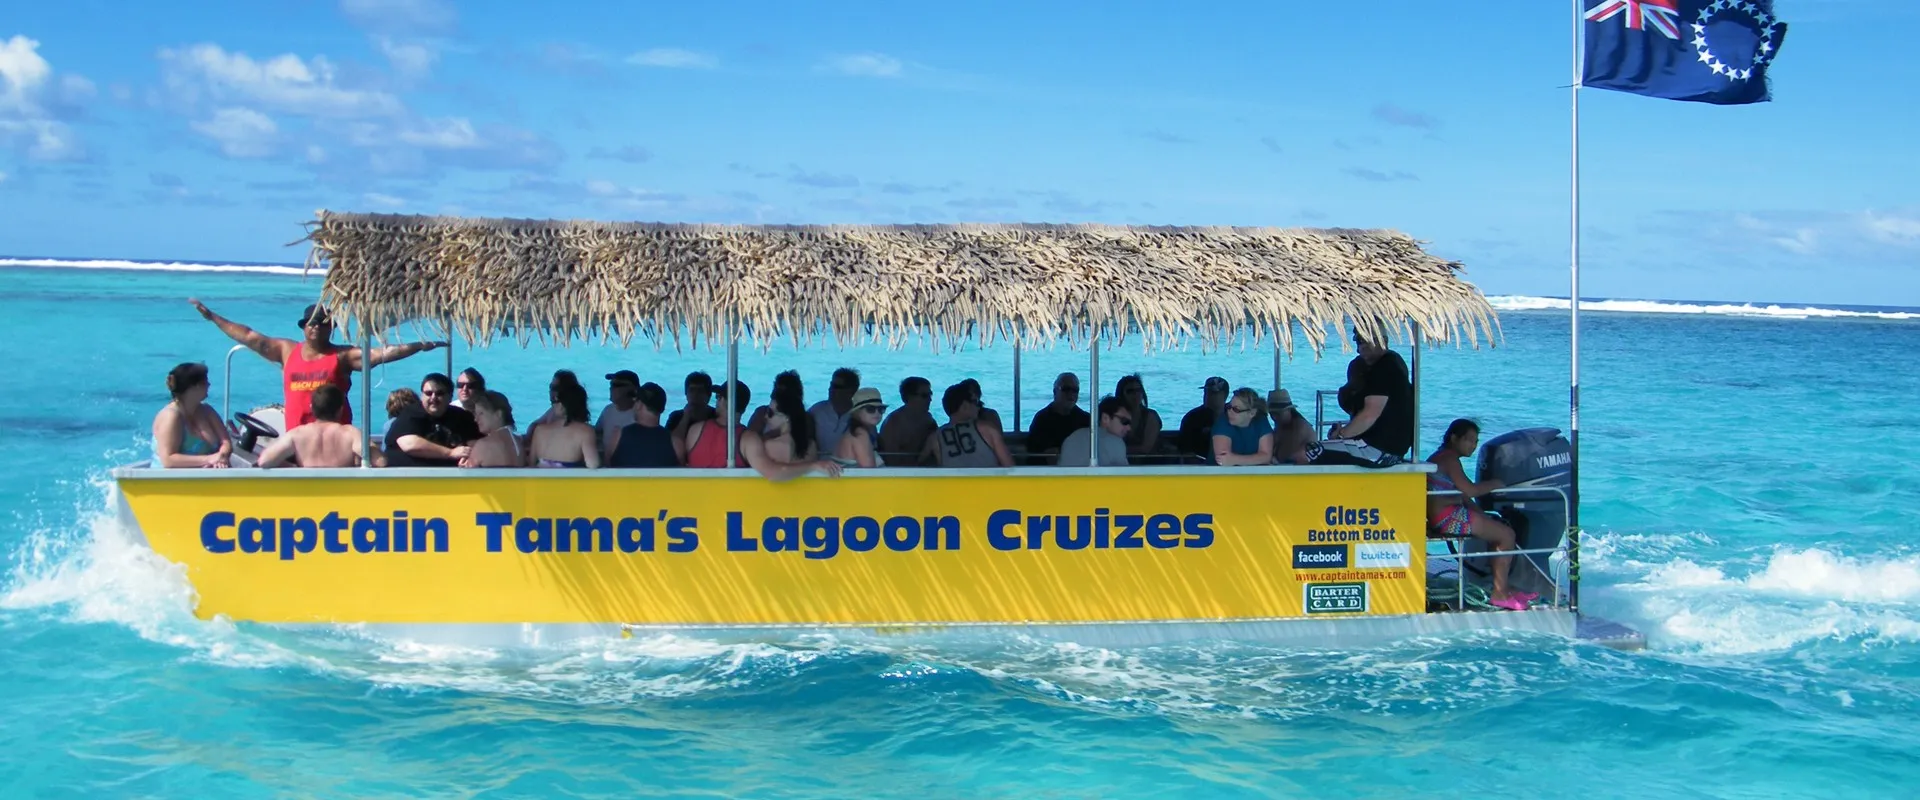 Captain Tama’s Lagoon Cruizes in Cook Islands, Australia and Oceania | Excursions - Rated 4.2